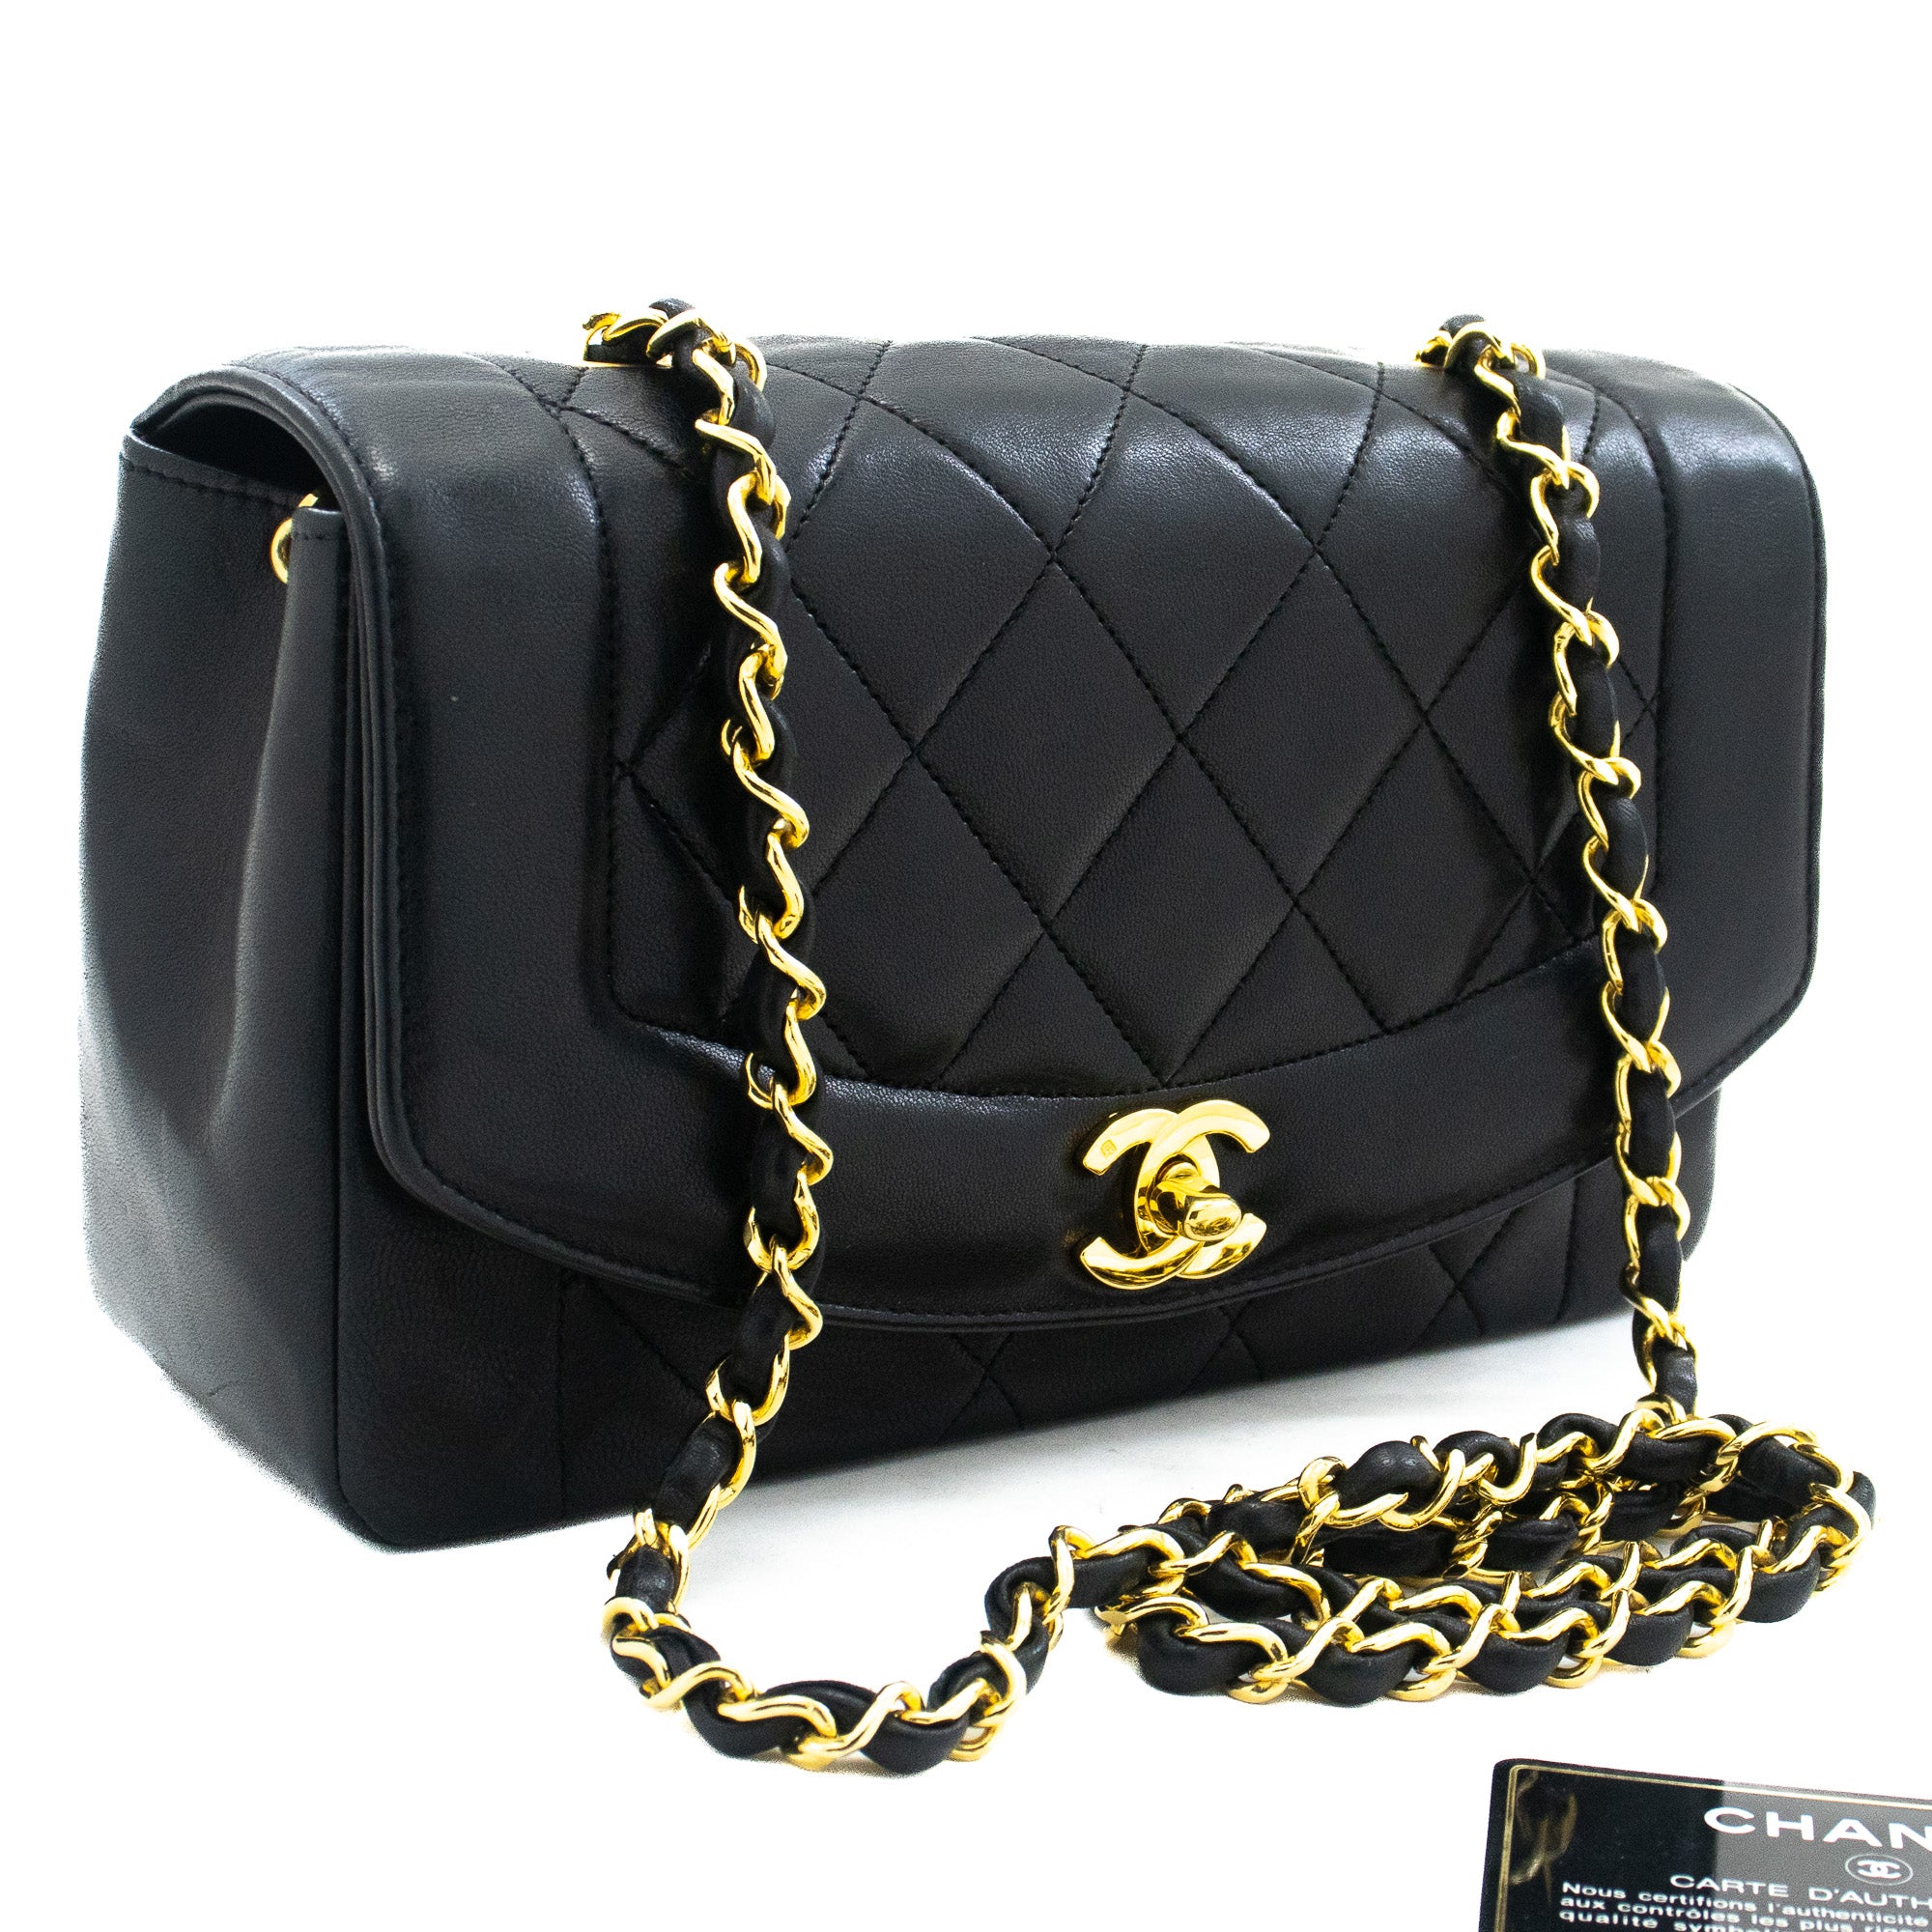 støj protein Spectacle CHANEL Diana Flap Chain Shoulder Bag Black Quilted Lambskin j90 –  hannari-shop